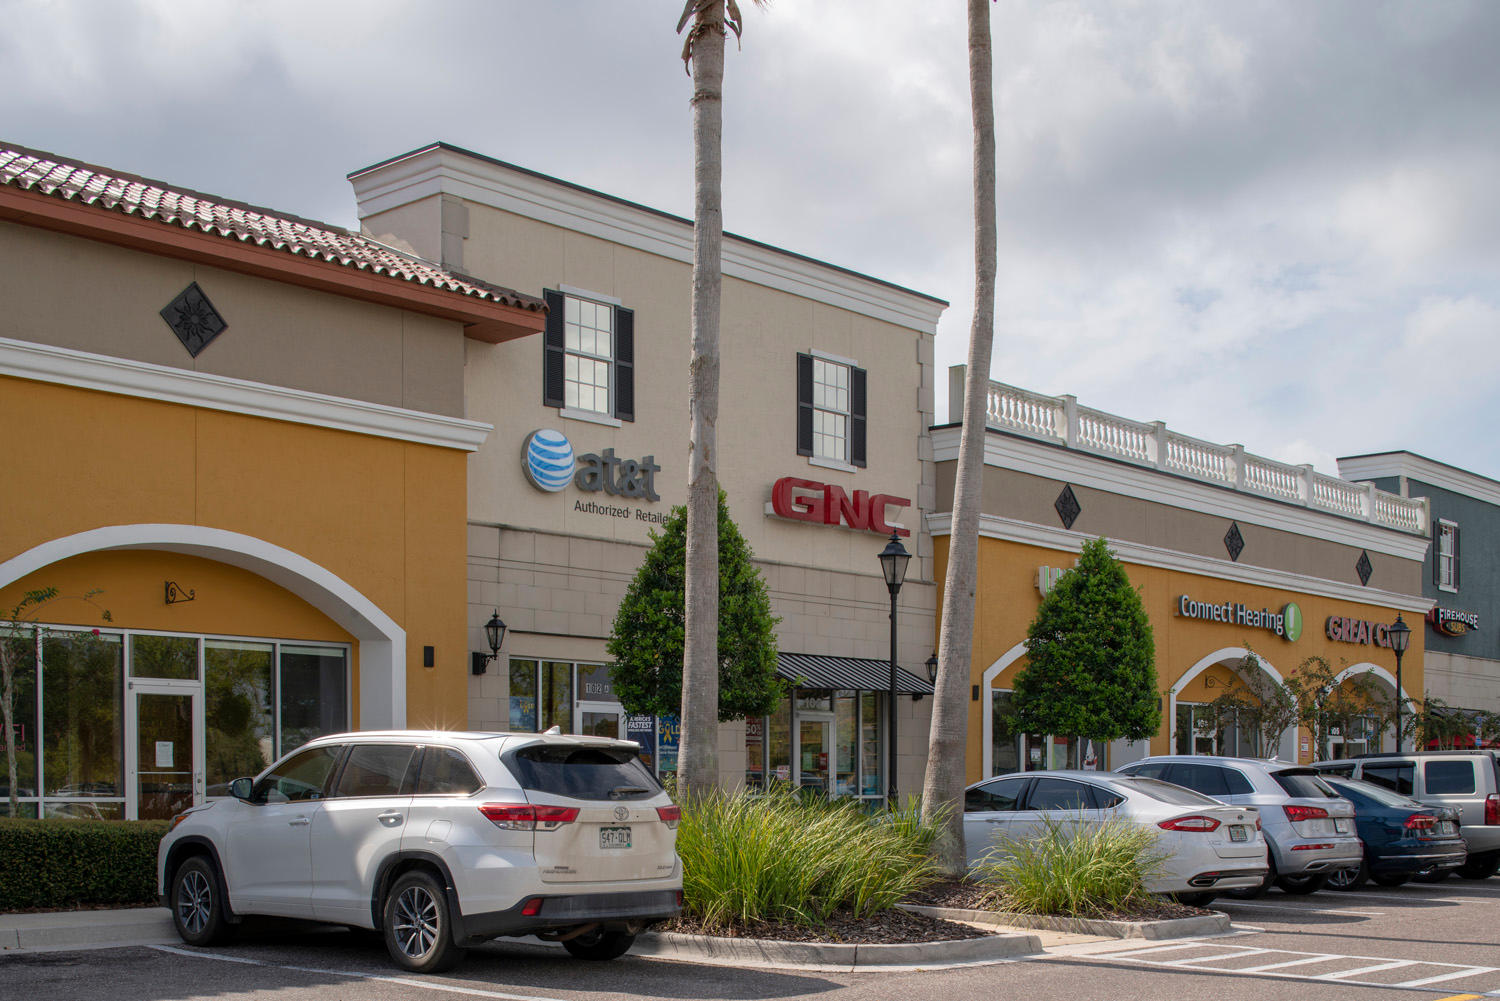 AT&T and GNC at King's Market Shopping Center